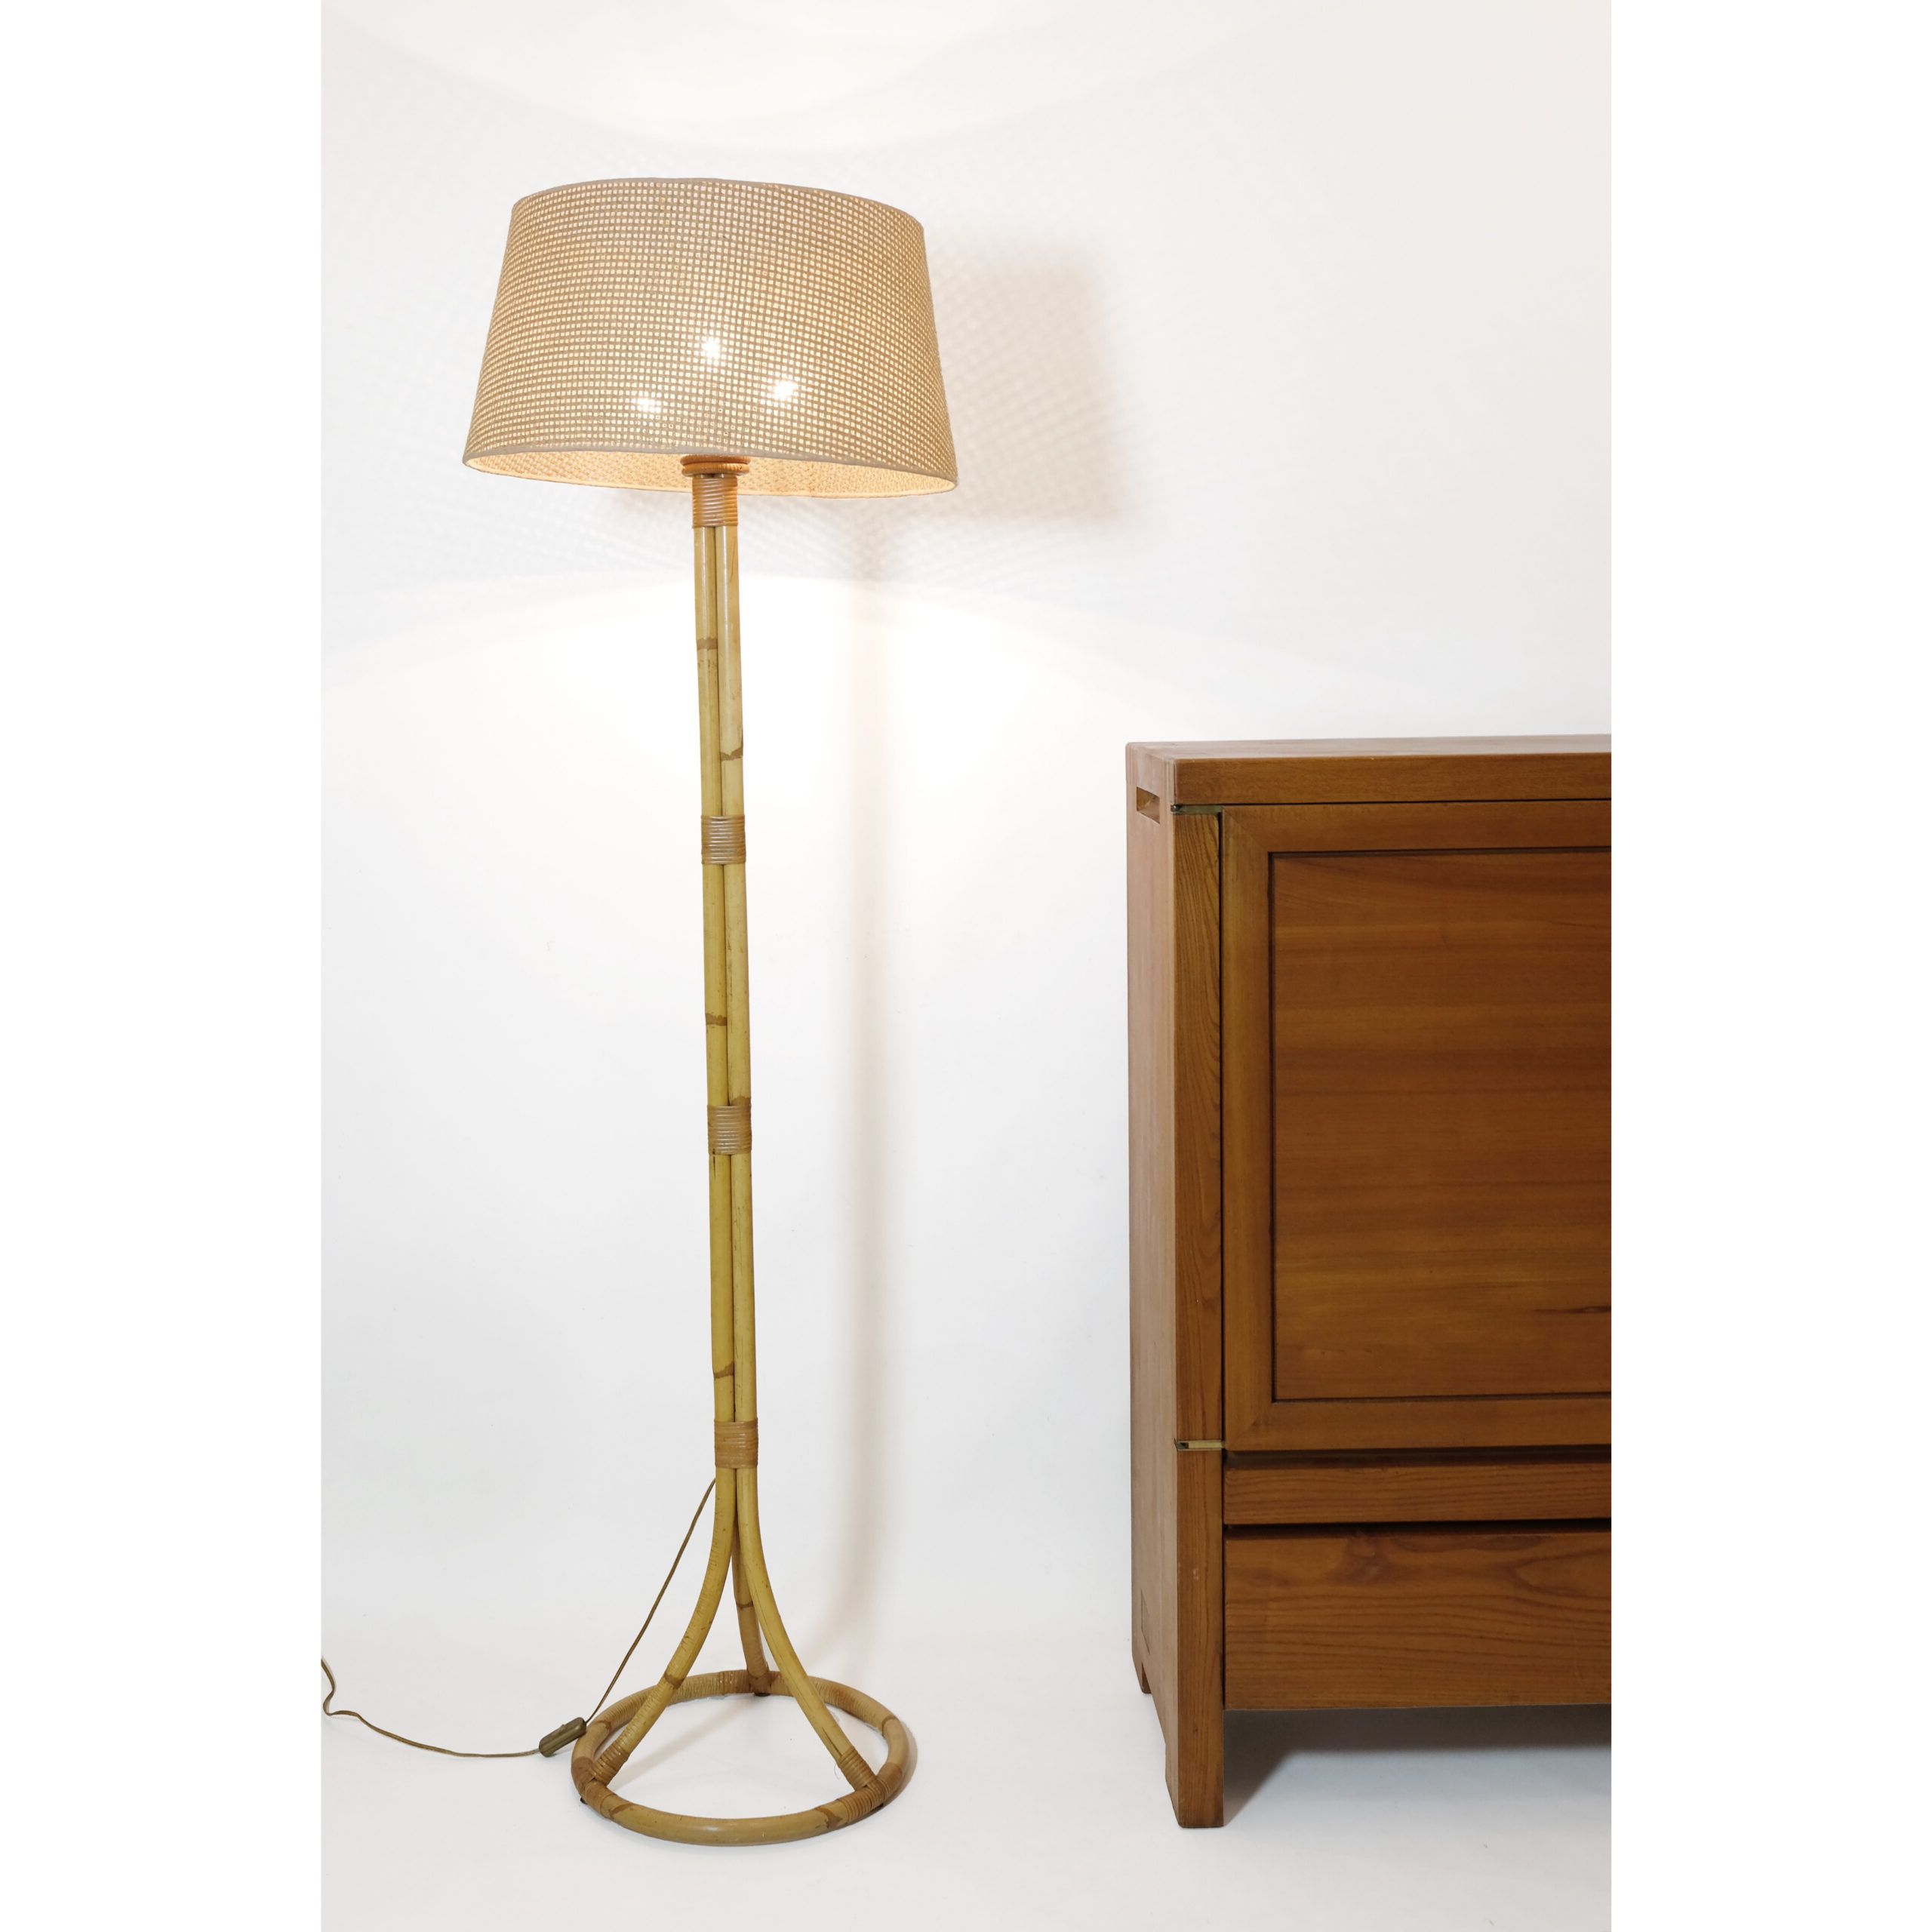 Louis Sognot, French Rattan Floor Lamp From The 1960s, 177cm (View 8 of 15)